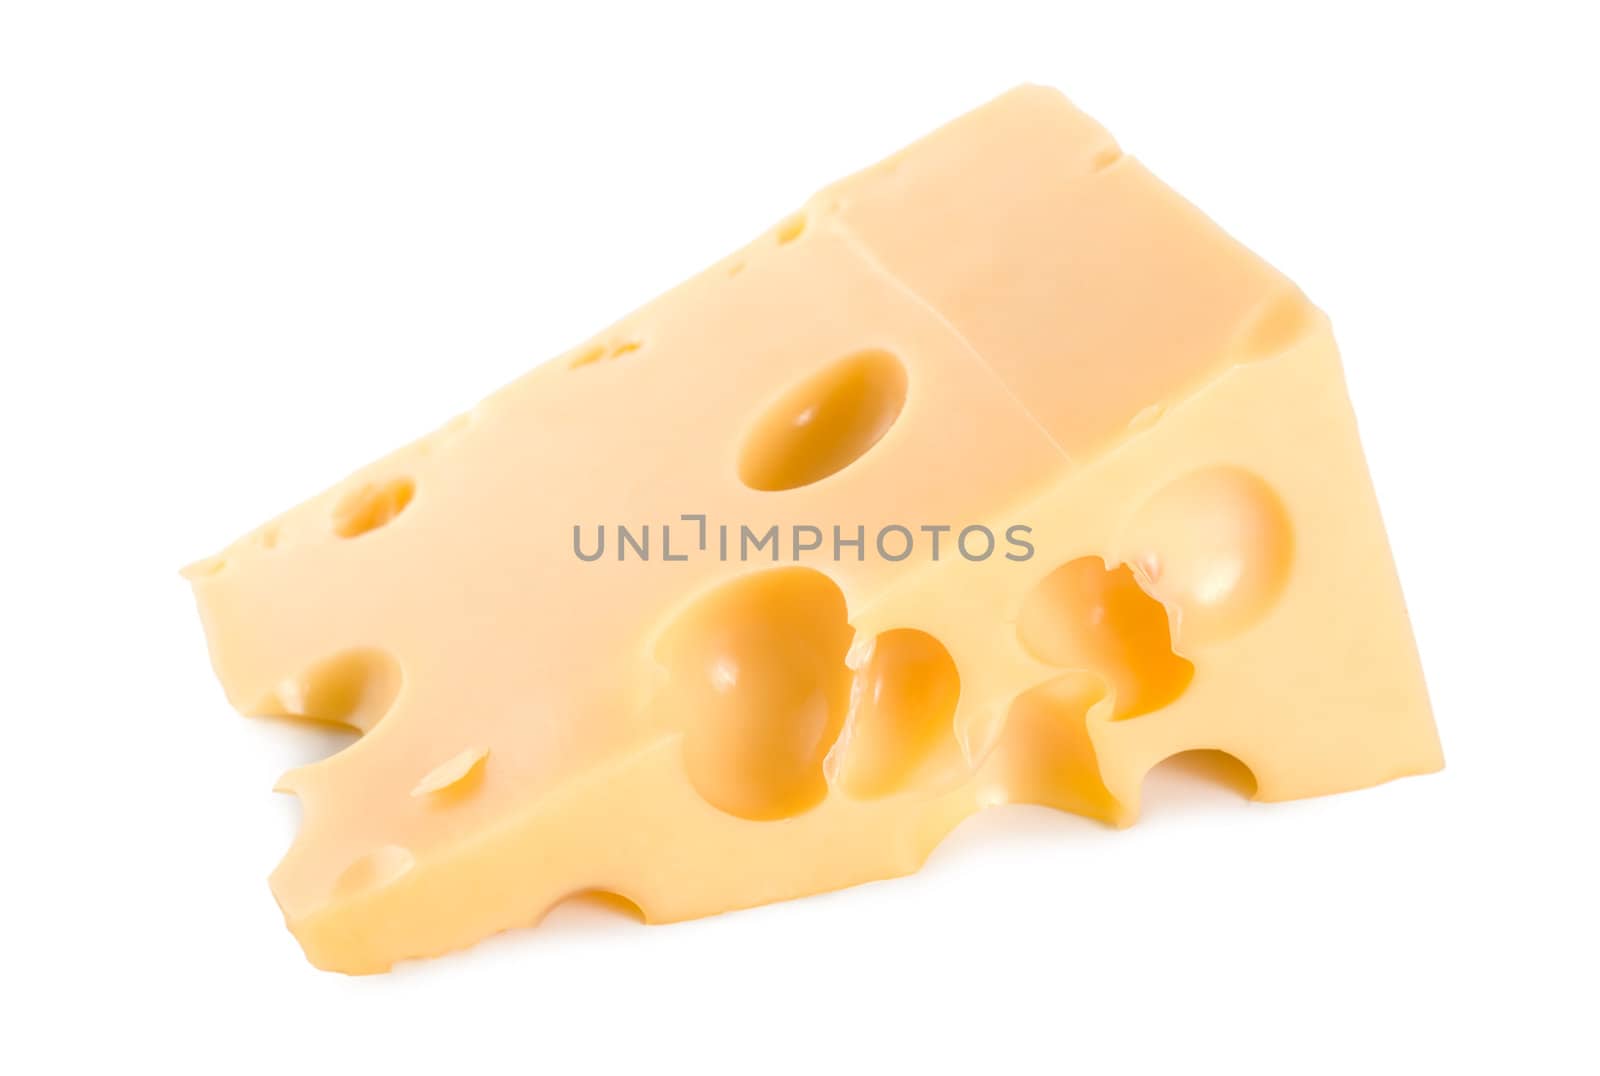 Fresh Dutch cheese isolated on white background